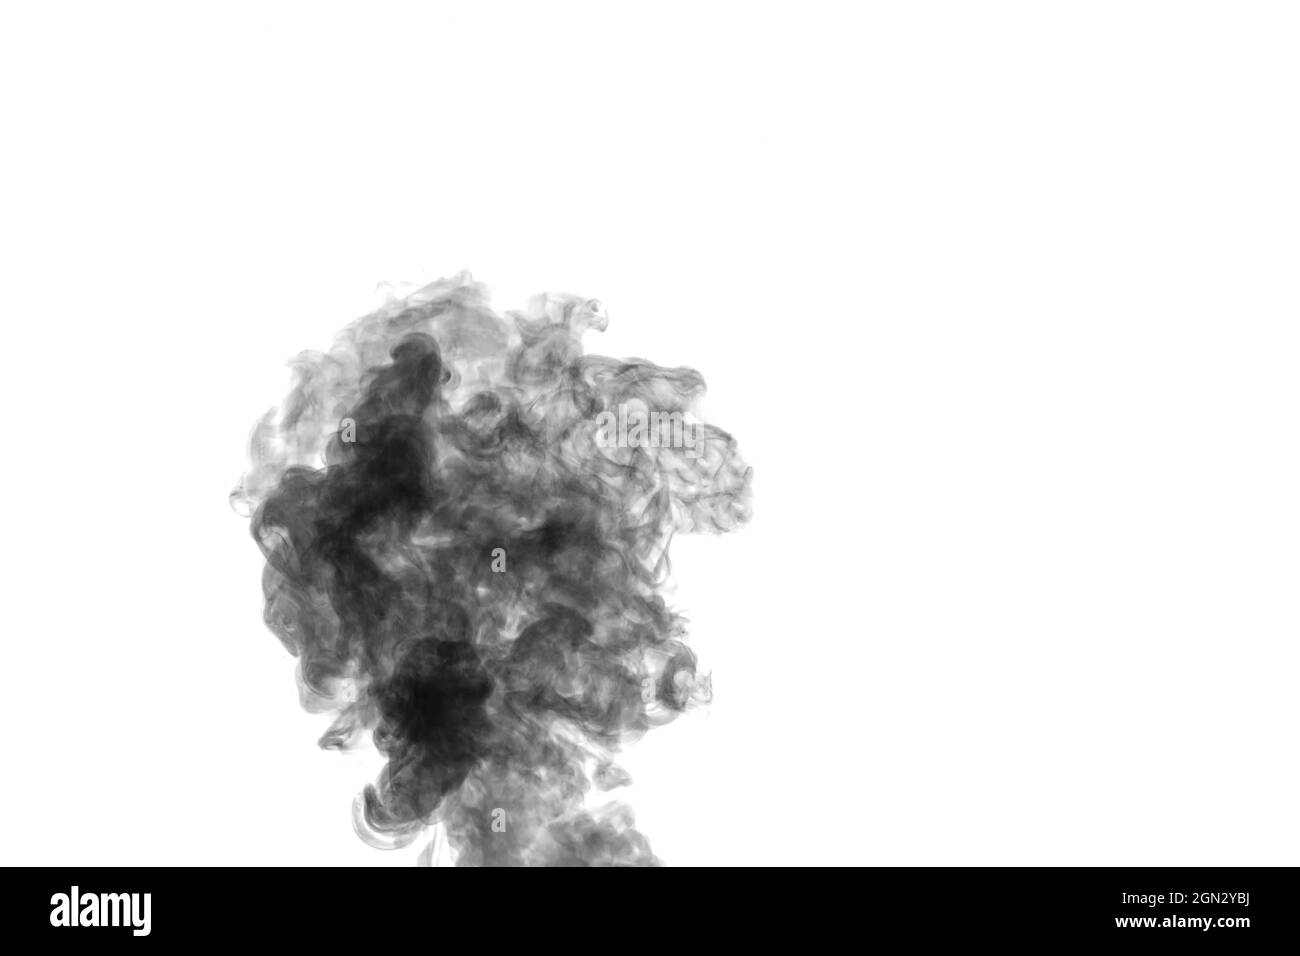 Black steam, smoke on a white background to superimpose on your photos. Create mystical Halloween photos. Abstract background, design element Stock Photo